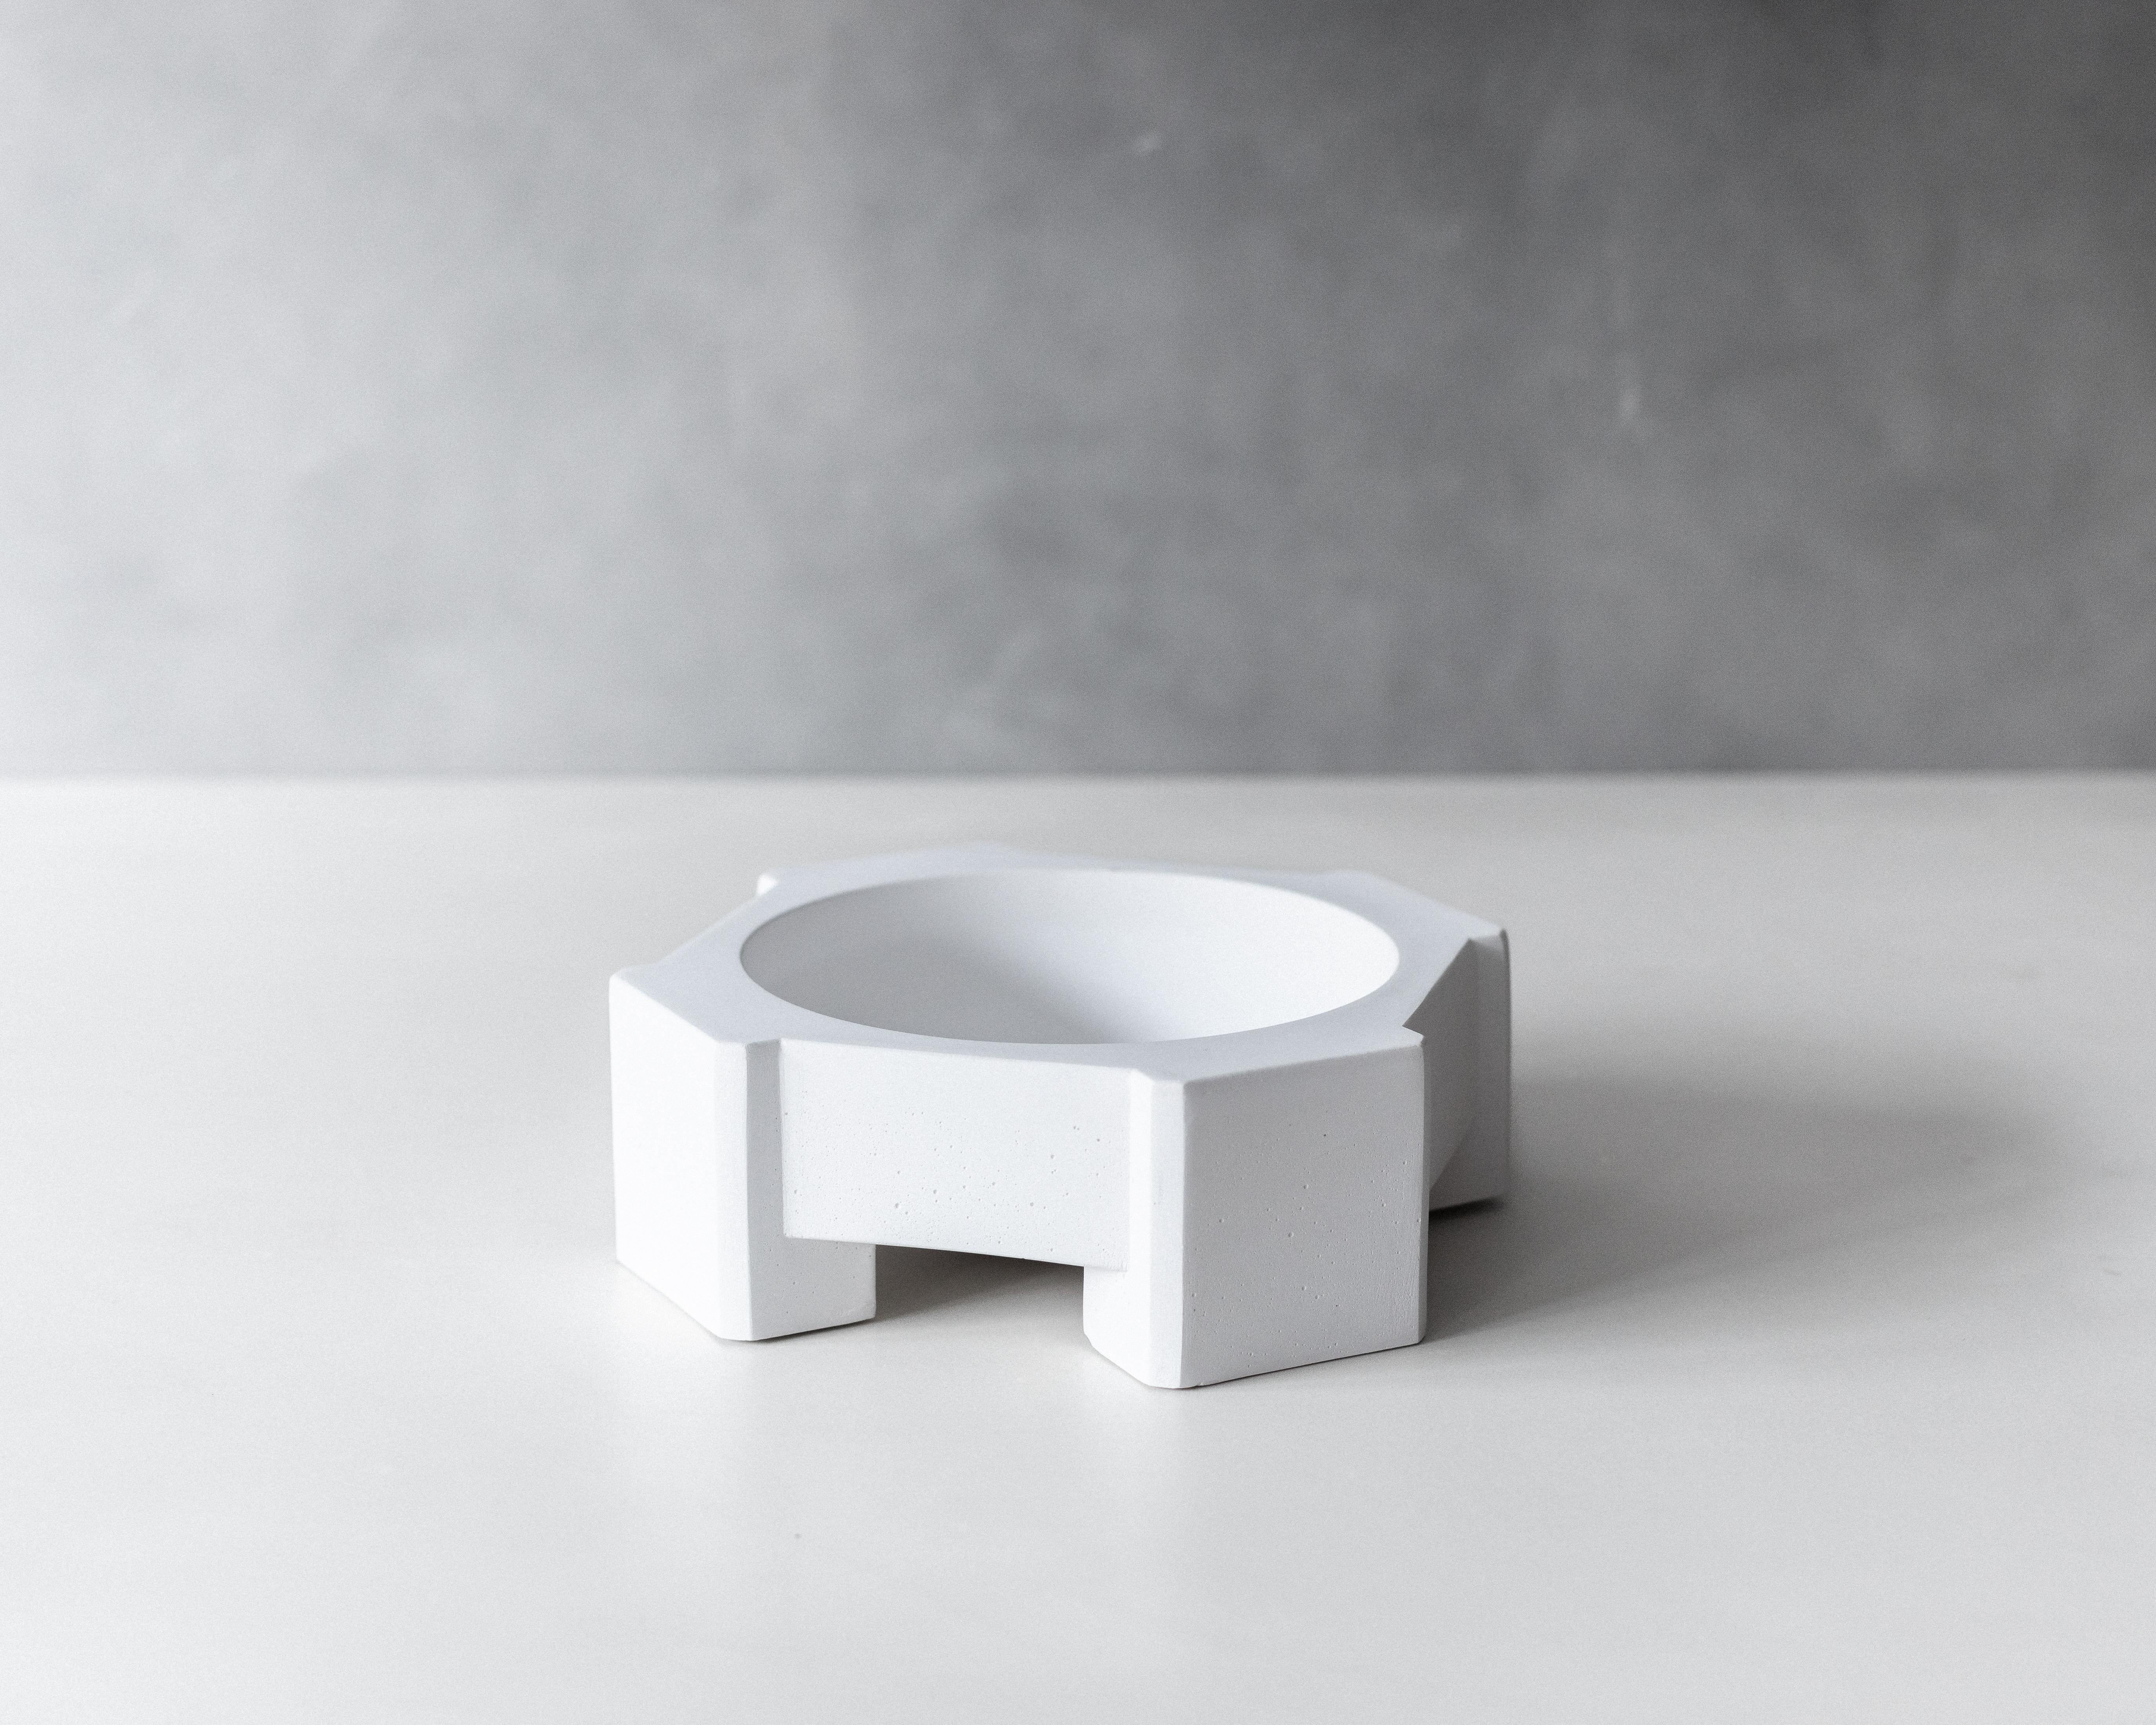 Our hand-cast gypsum cement Brutalist Catchall made in our Brooklyn studio, was inspired by the architecture of London’s Royal National Theatre. When stacked, these sculptural pieces evoke the massing of a concrete building.

Packed and shipped in